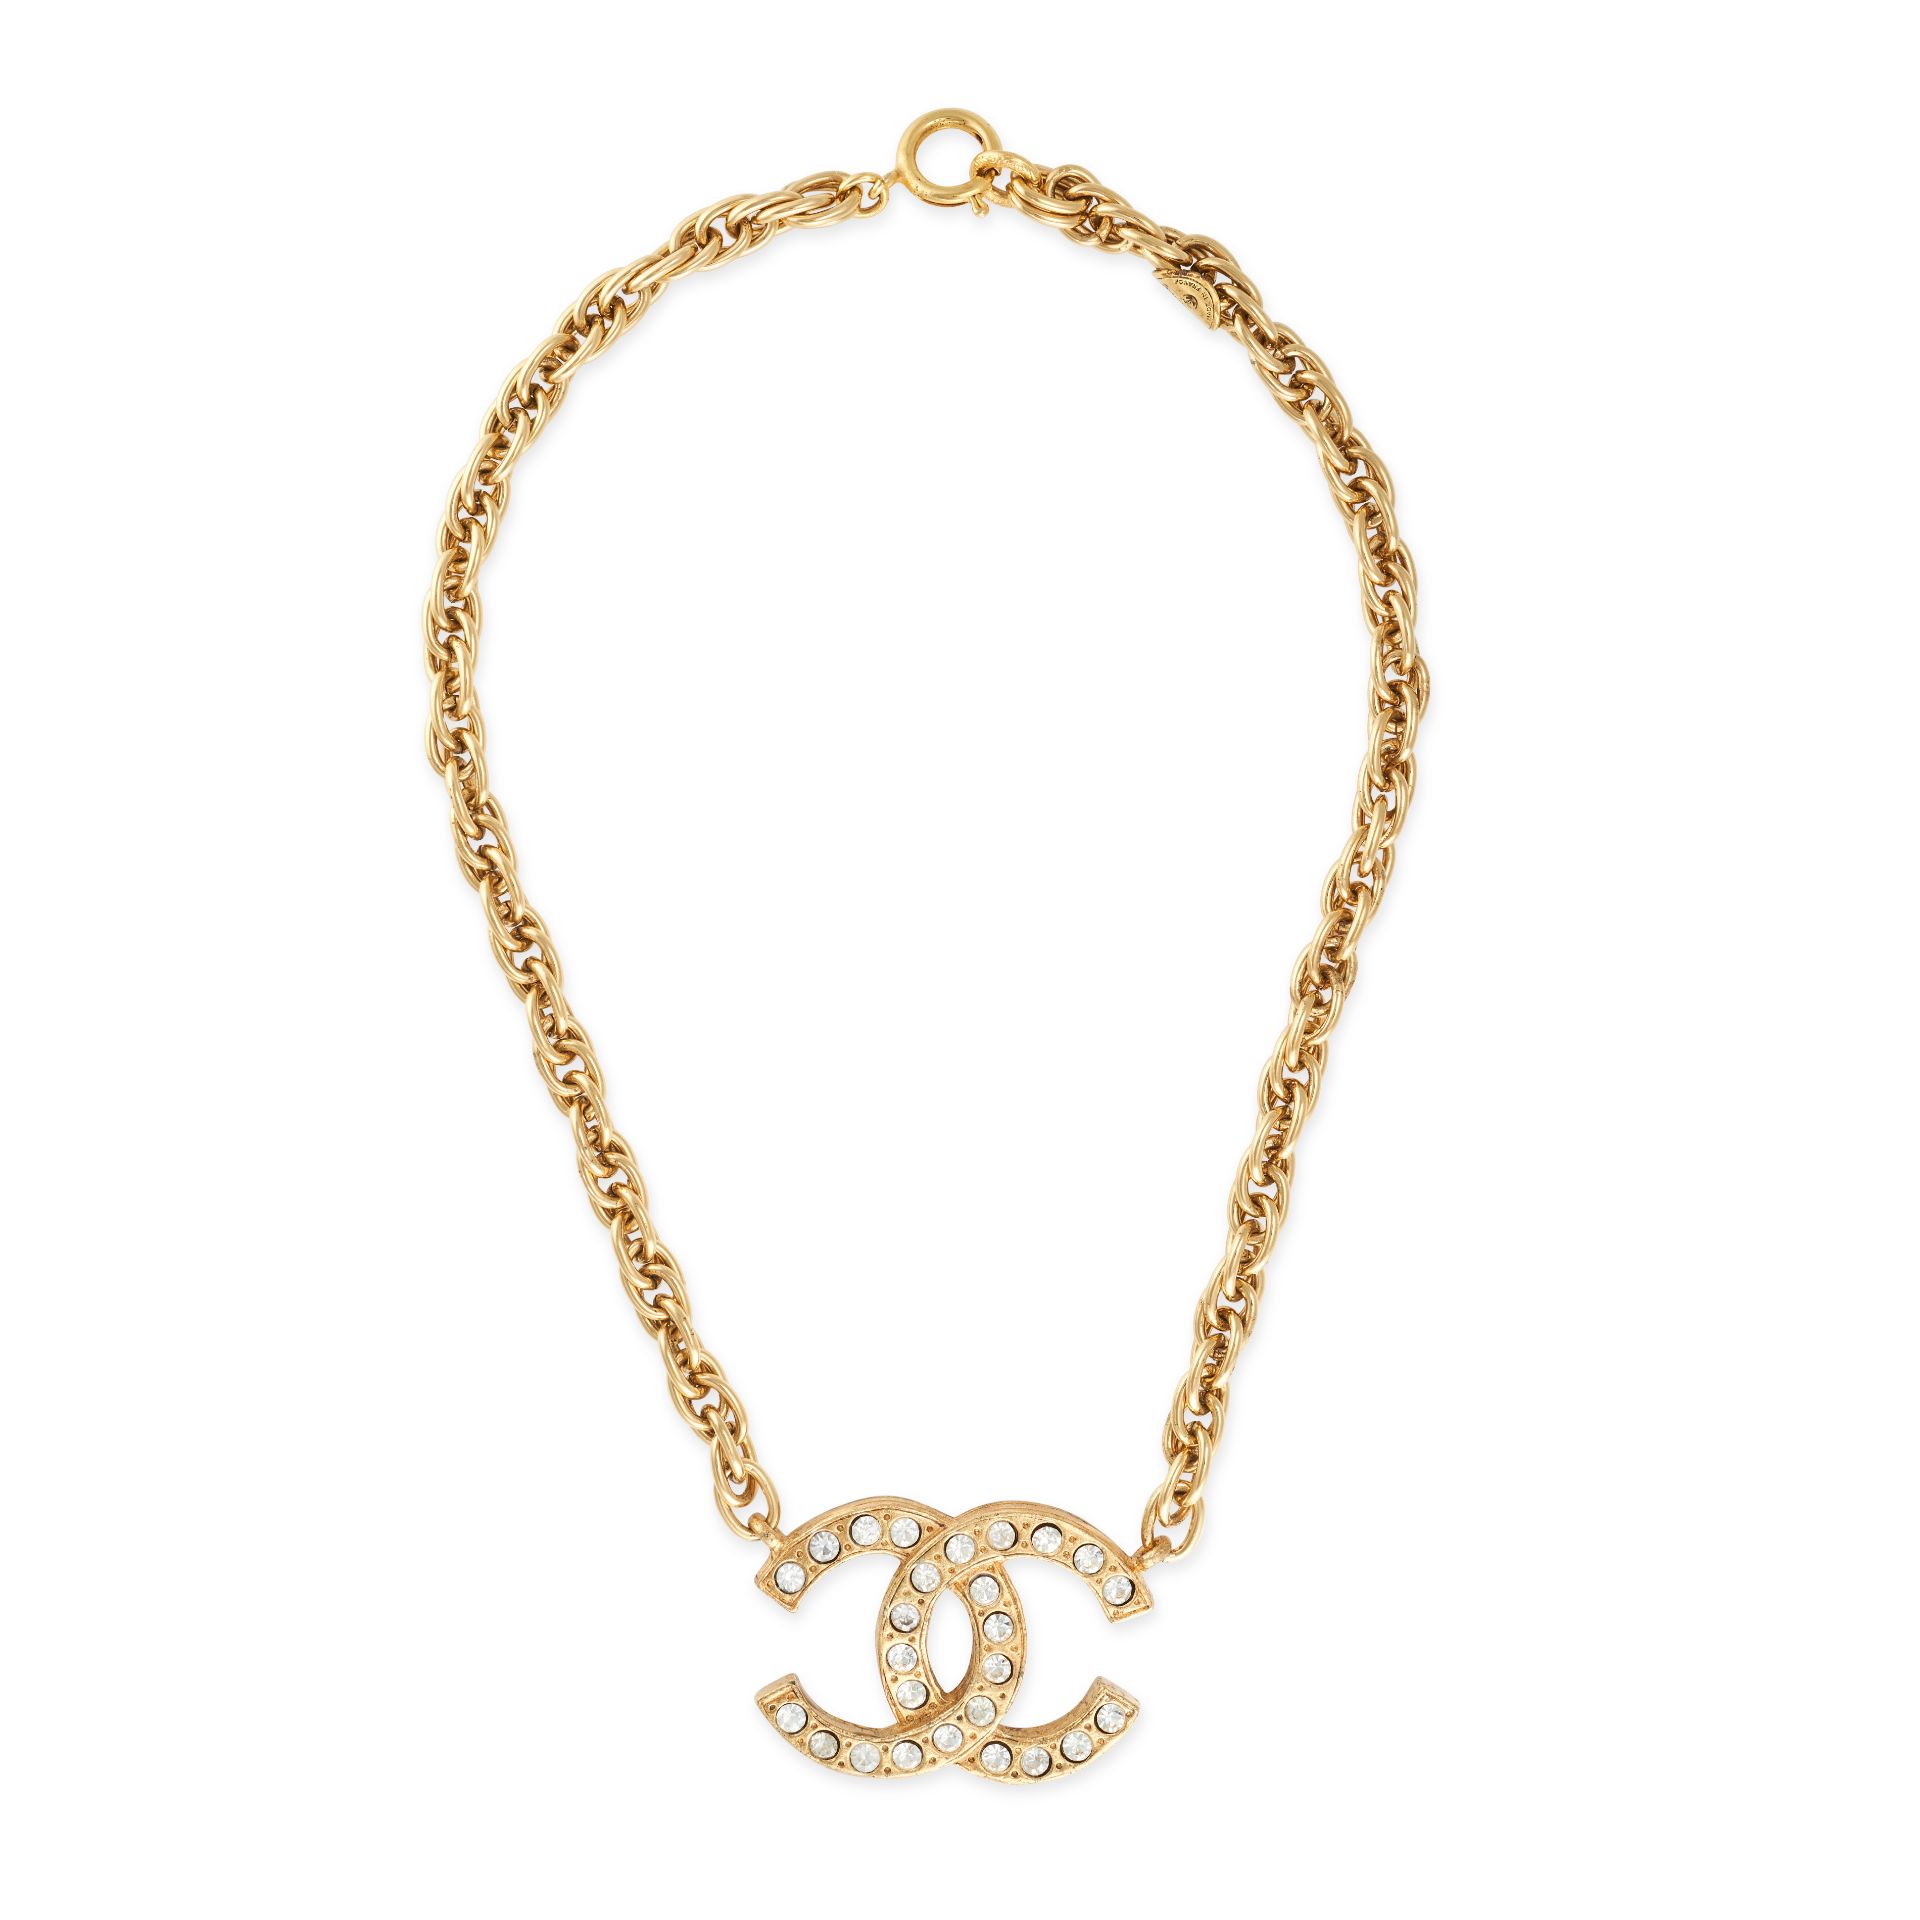 CHANEL, A CRYSTAL CC PENDANT AND CHAIN comprising a crystal embellished pendant with interlocking...